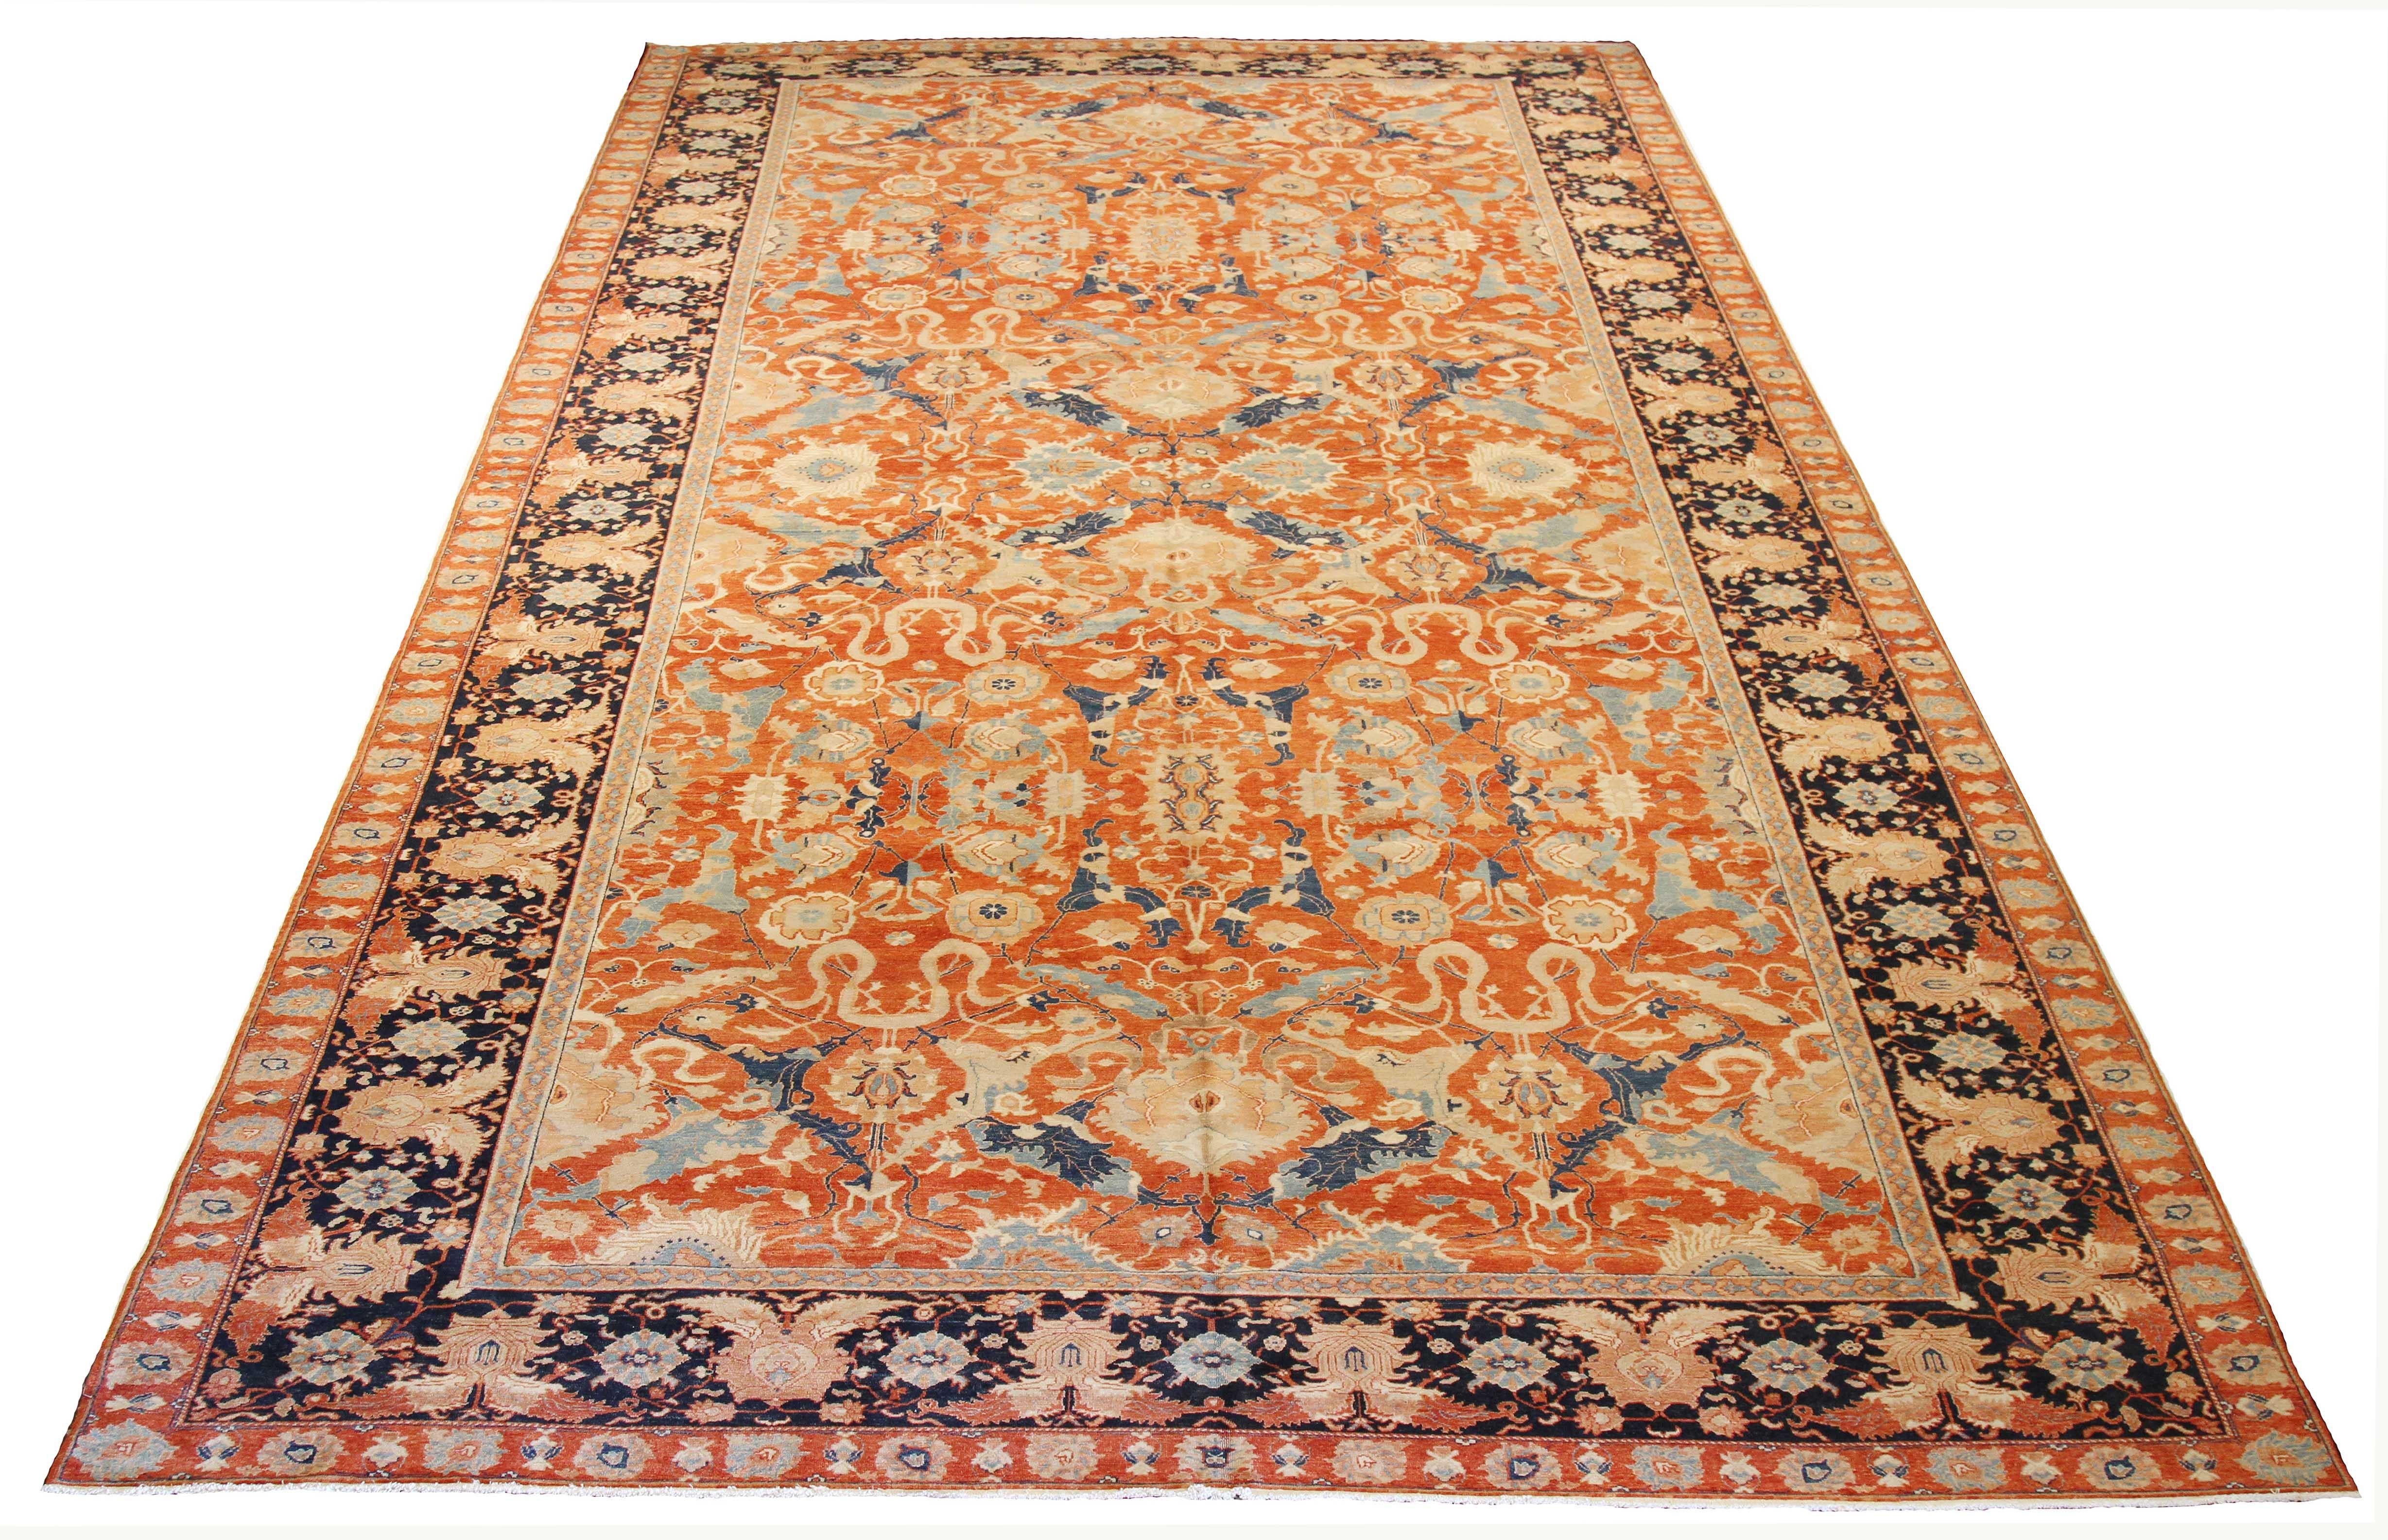 Contemporary Turkish rug handwoven from the finest sheep’s wool and colored with all-natural vegetable dyes that are safe for humans and pets. It’s a traditional Farahan weaving featuring a lovely ensemble of floral designs in navy and gray over a